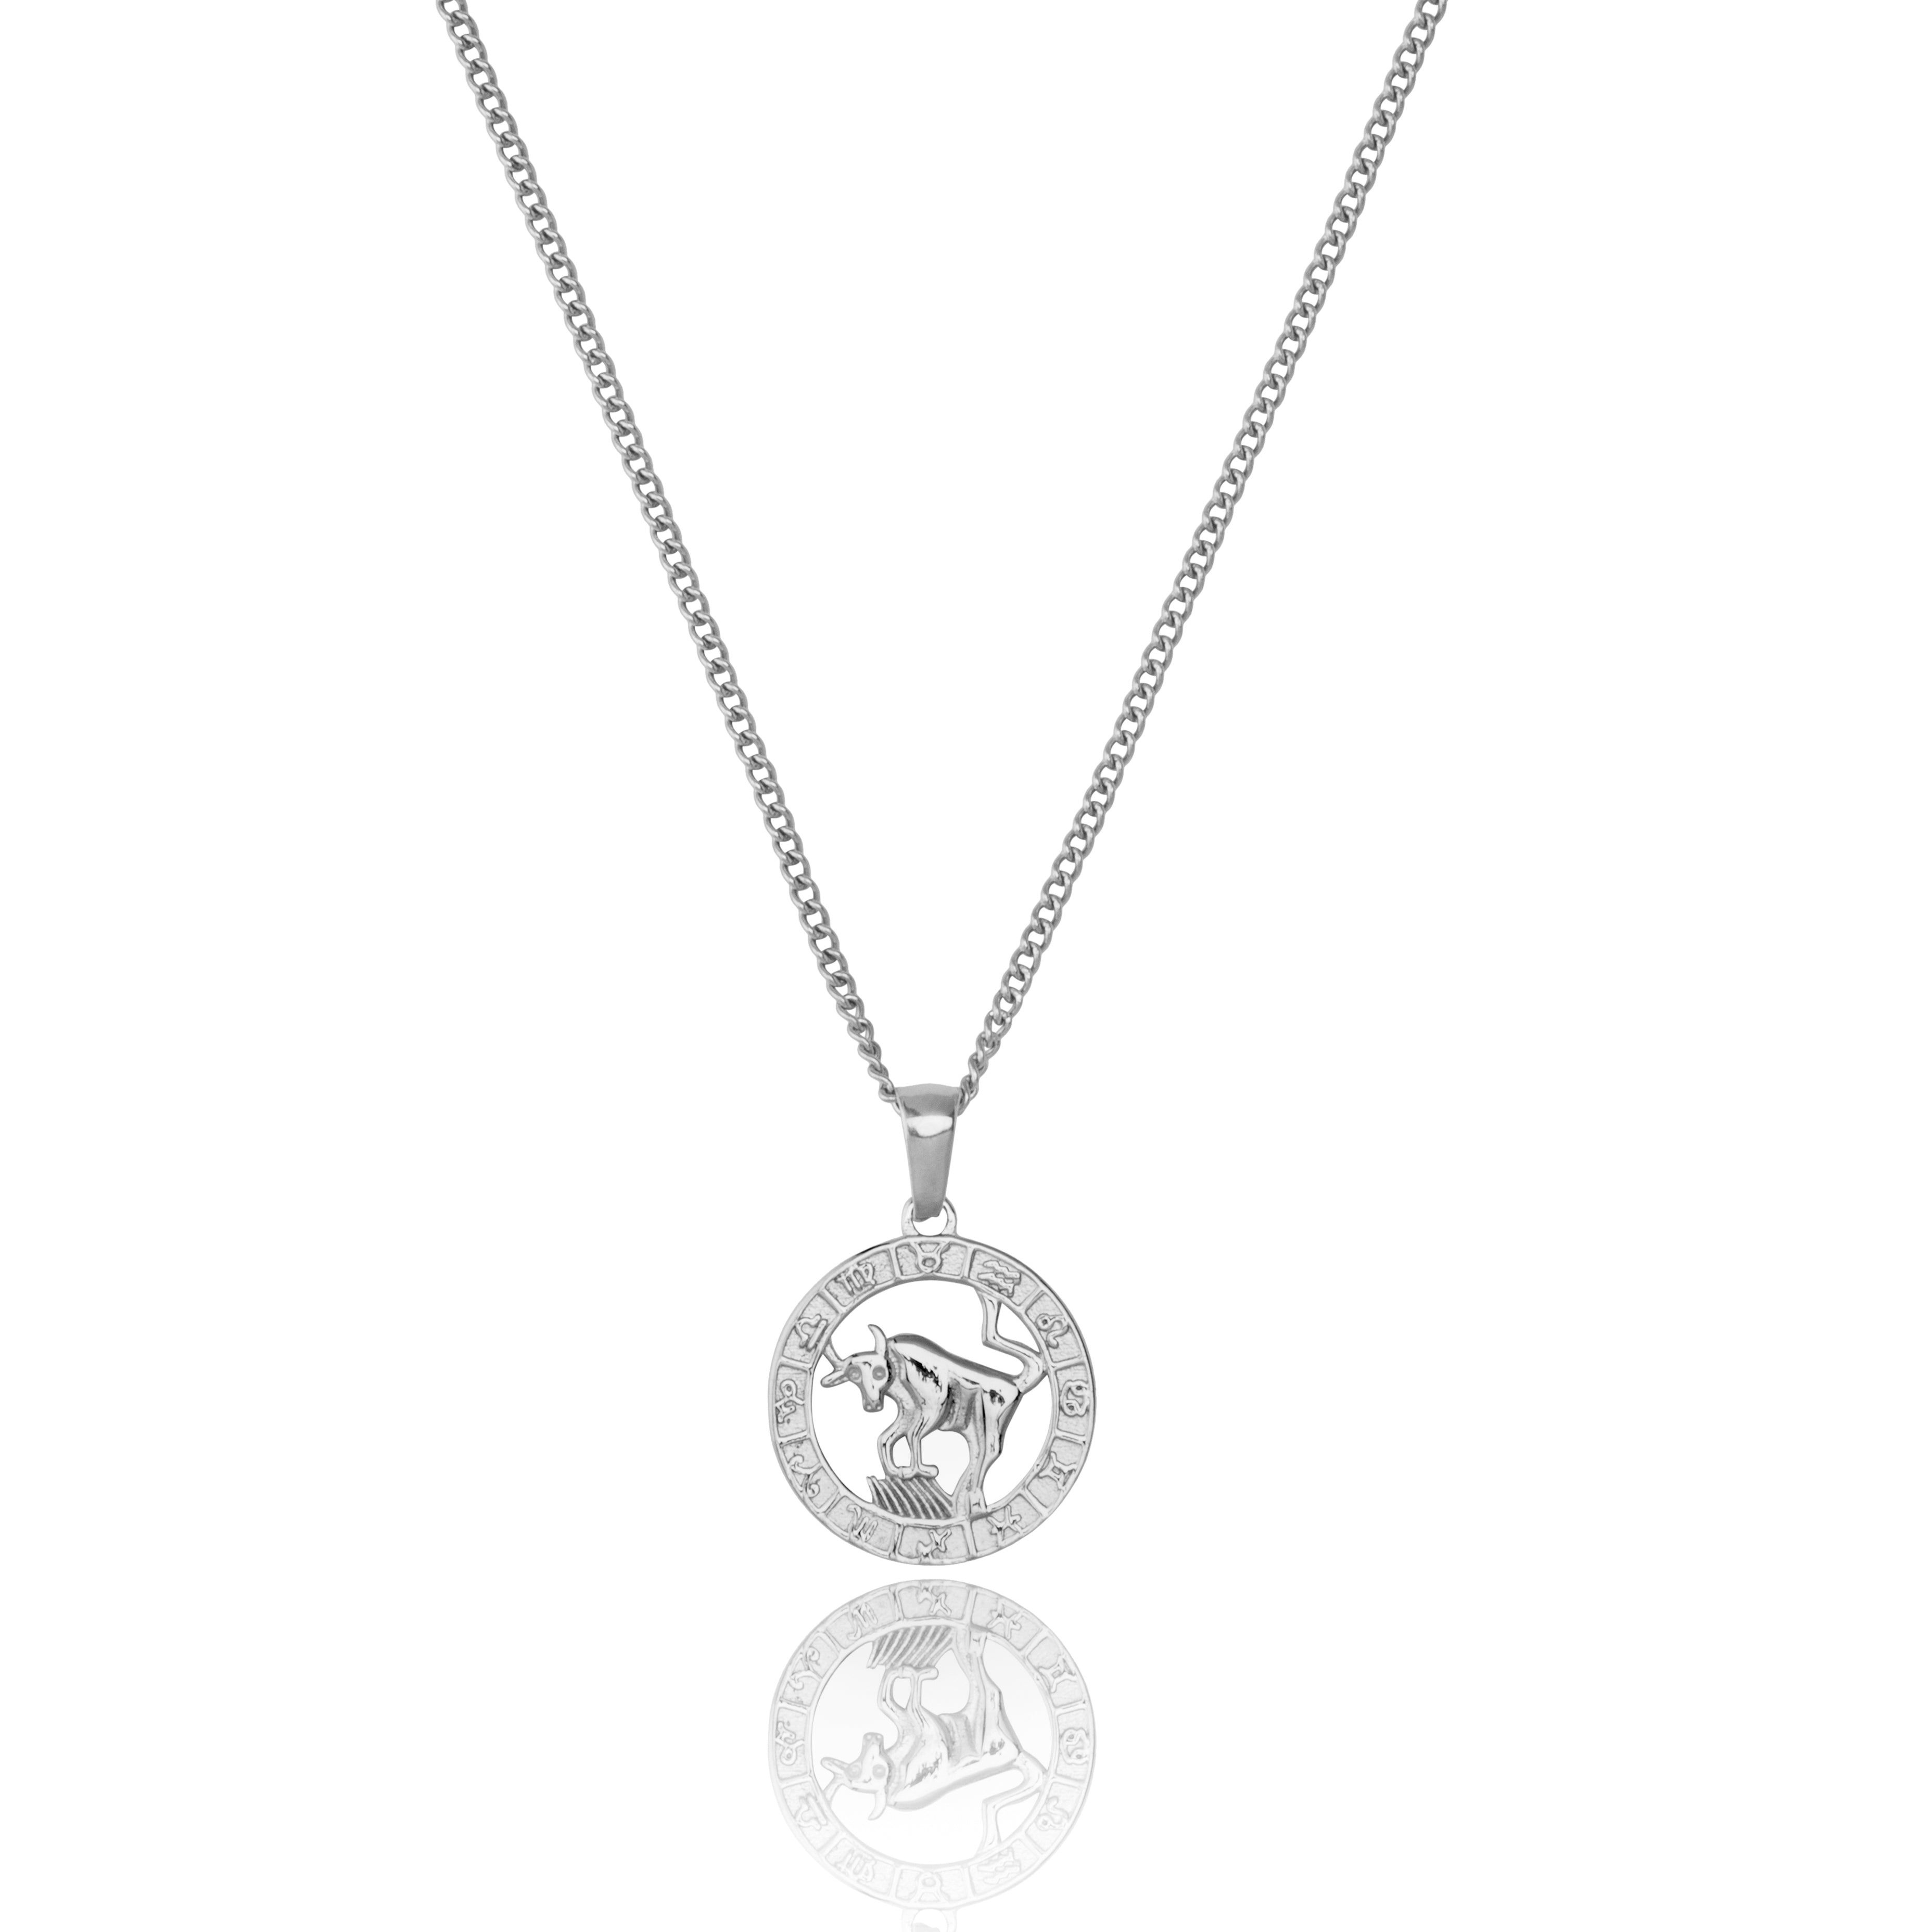 Stainless Steel Taurus Zodiac Pendant and Chain